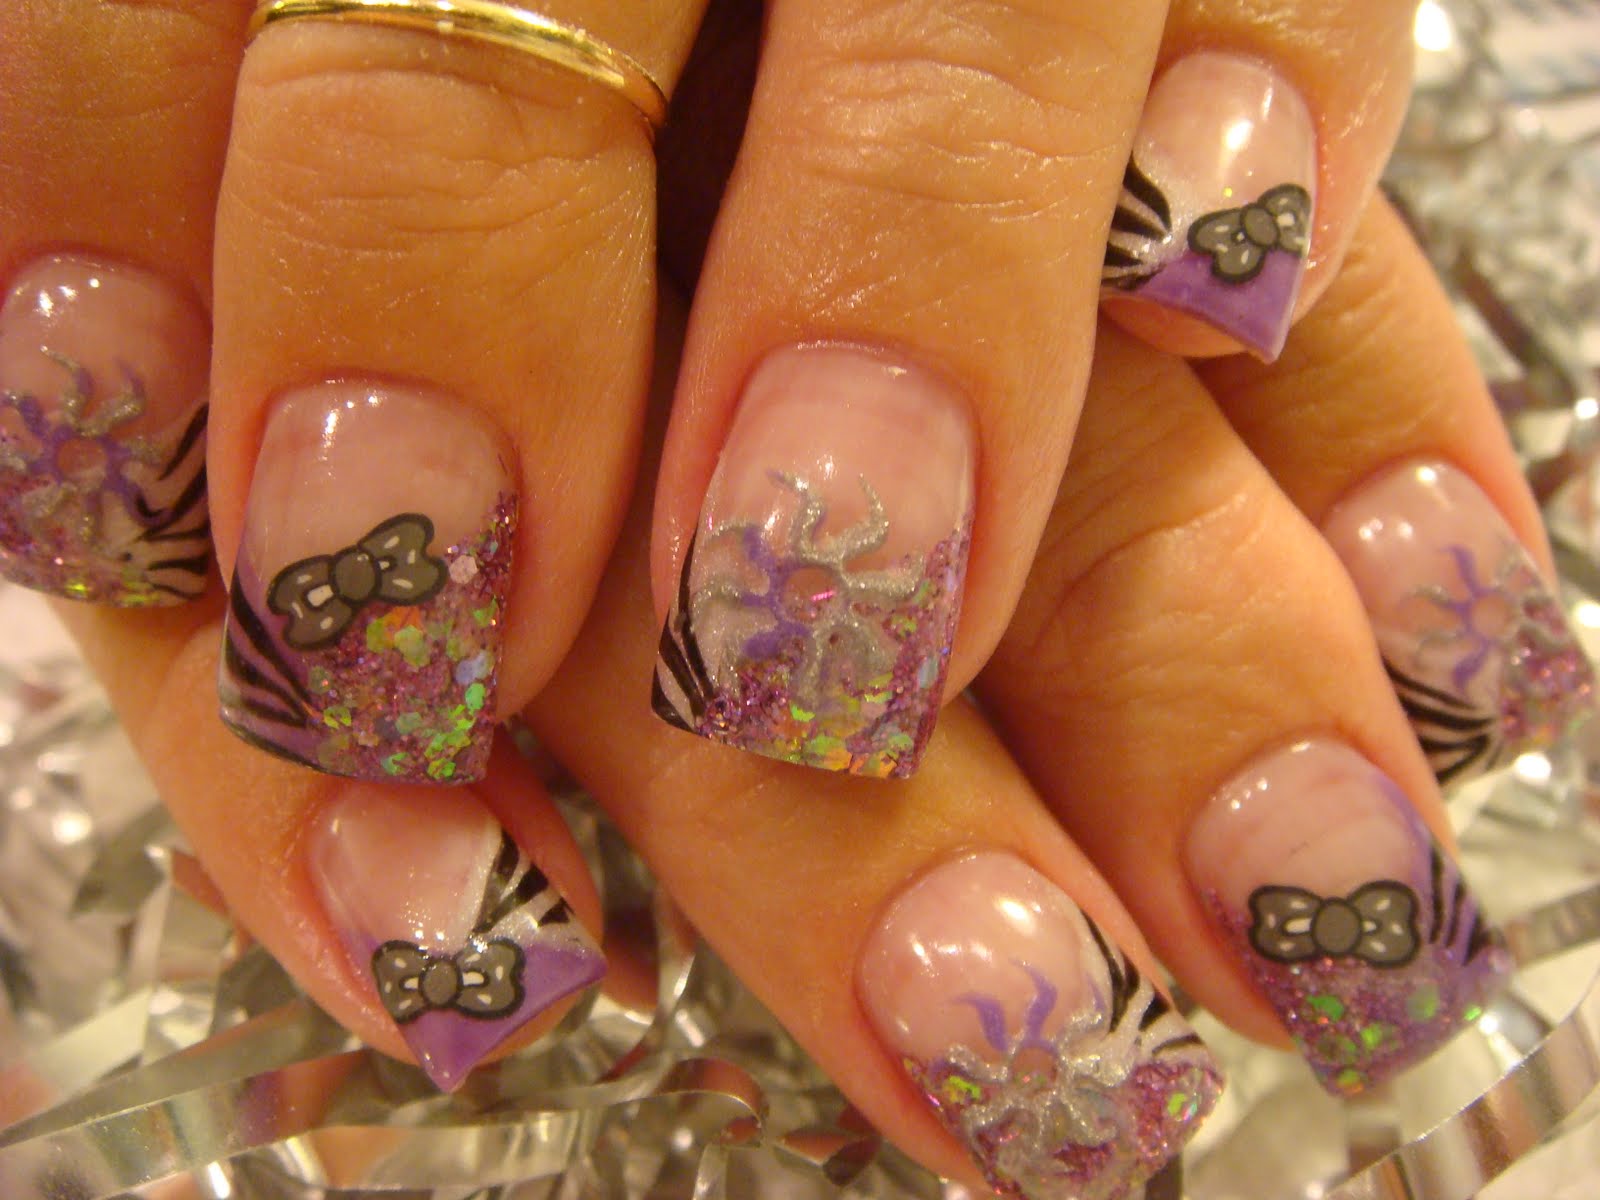 1. Nail Art Gallery - wide 9